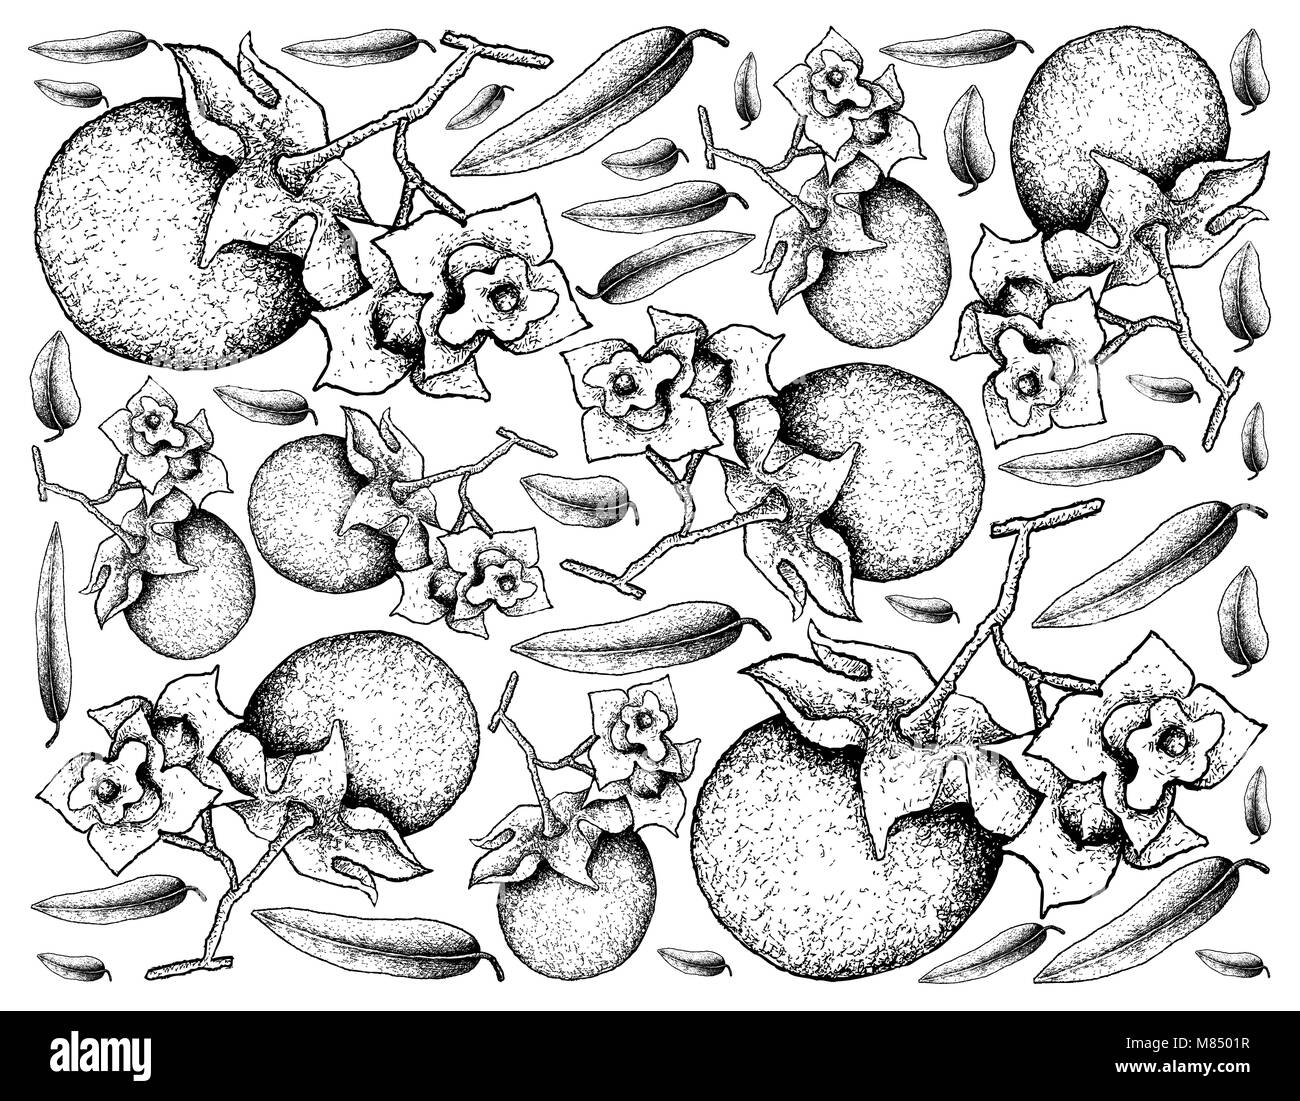 Tropical Fruit, Illustration Wallpaper Background of Hand Drawn Sketch Ripe and Sweet Malabar Ebony or Diospyros Malabarica Fruits. Stock Photo